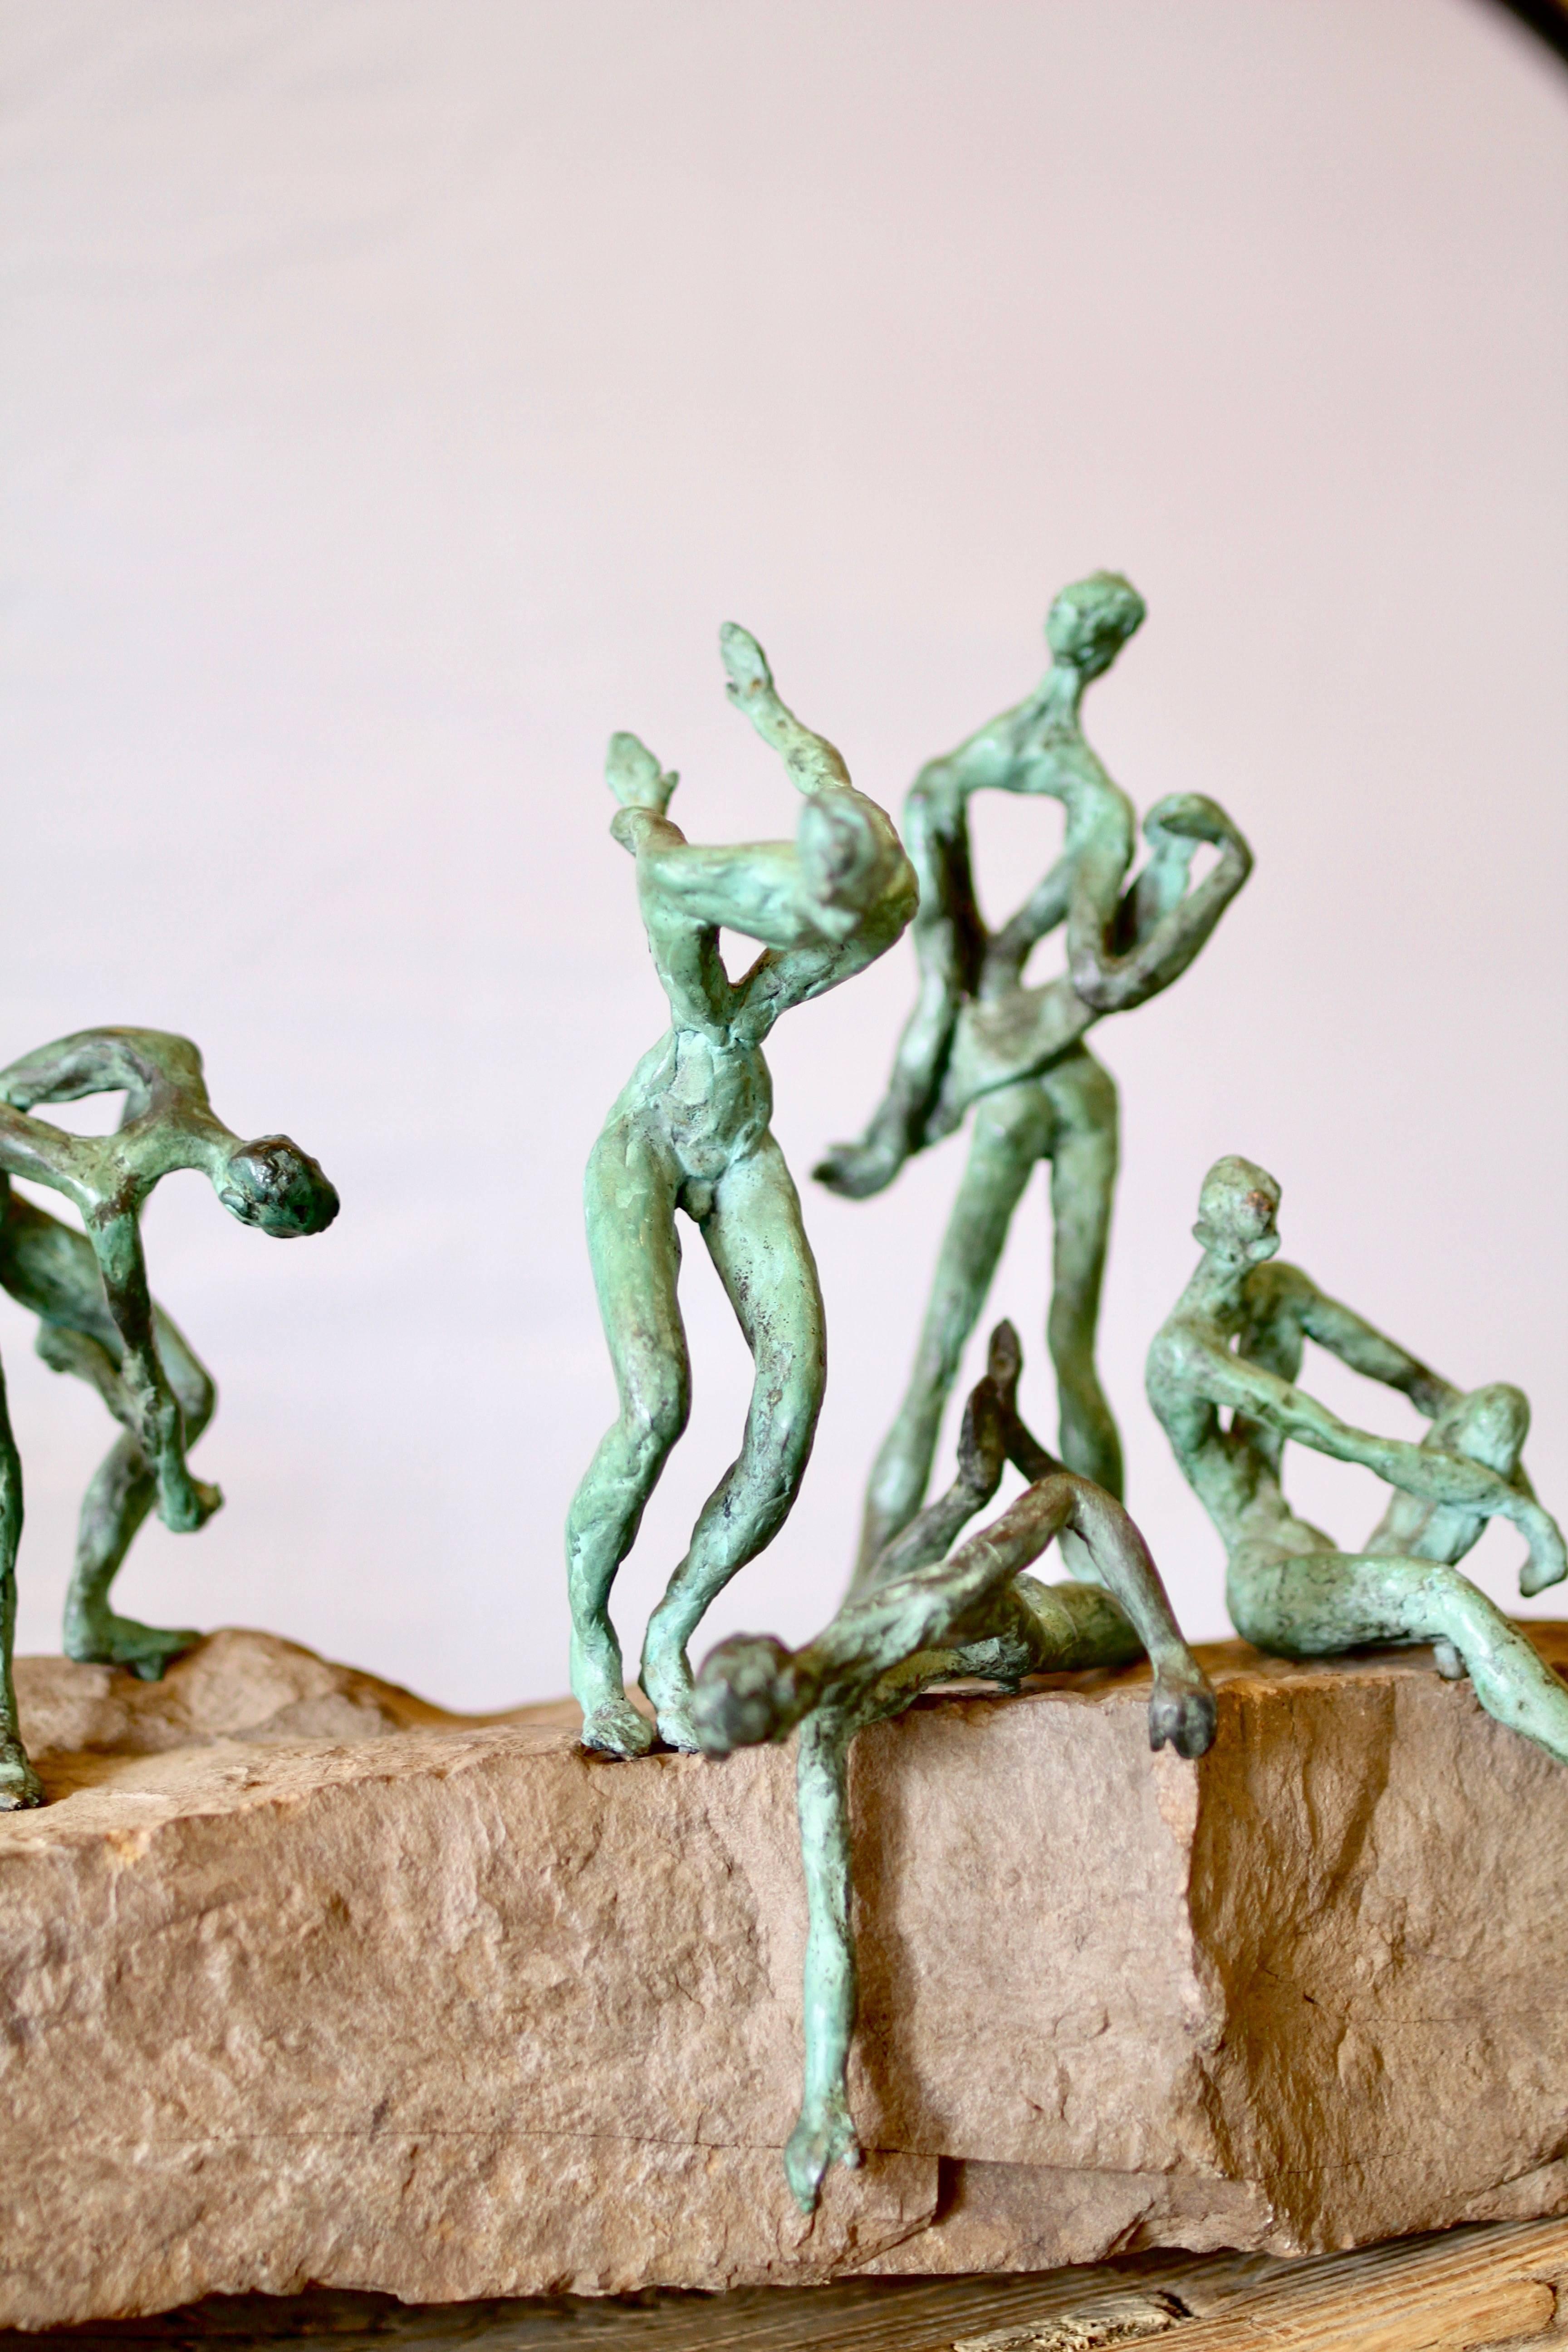 This amazing free-form sculpture is called Afternoons at the River. It almost seems to move when you don't look! Each hand made bronze figure is perfectly sculpted to fit exactly at the spot it is mounted in and fits with pegs at the end of each